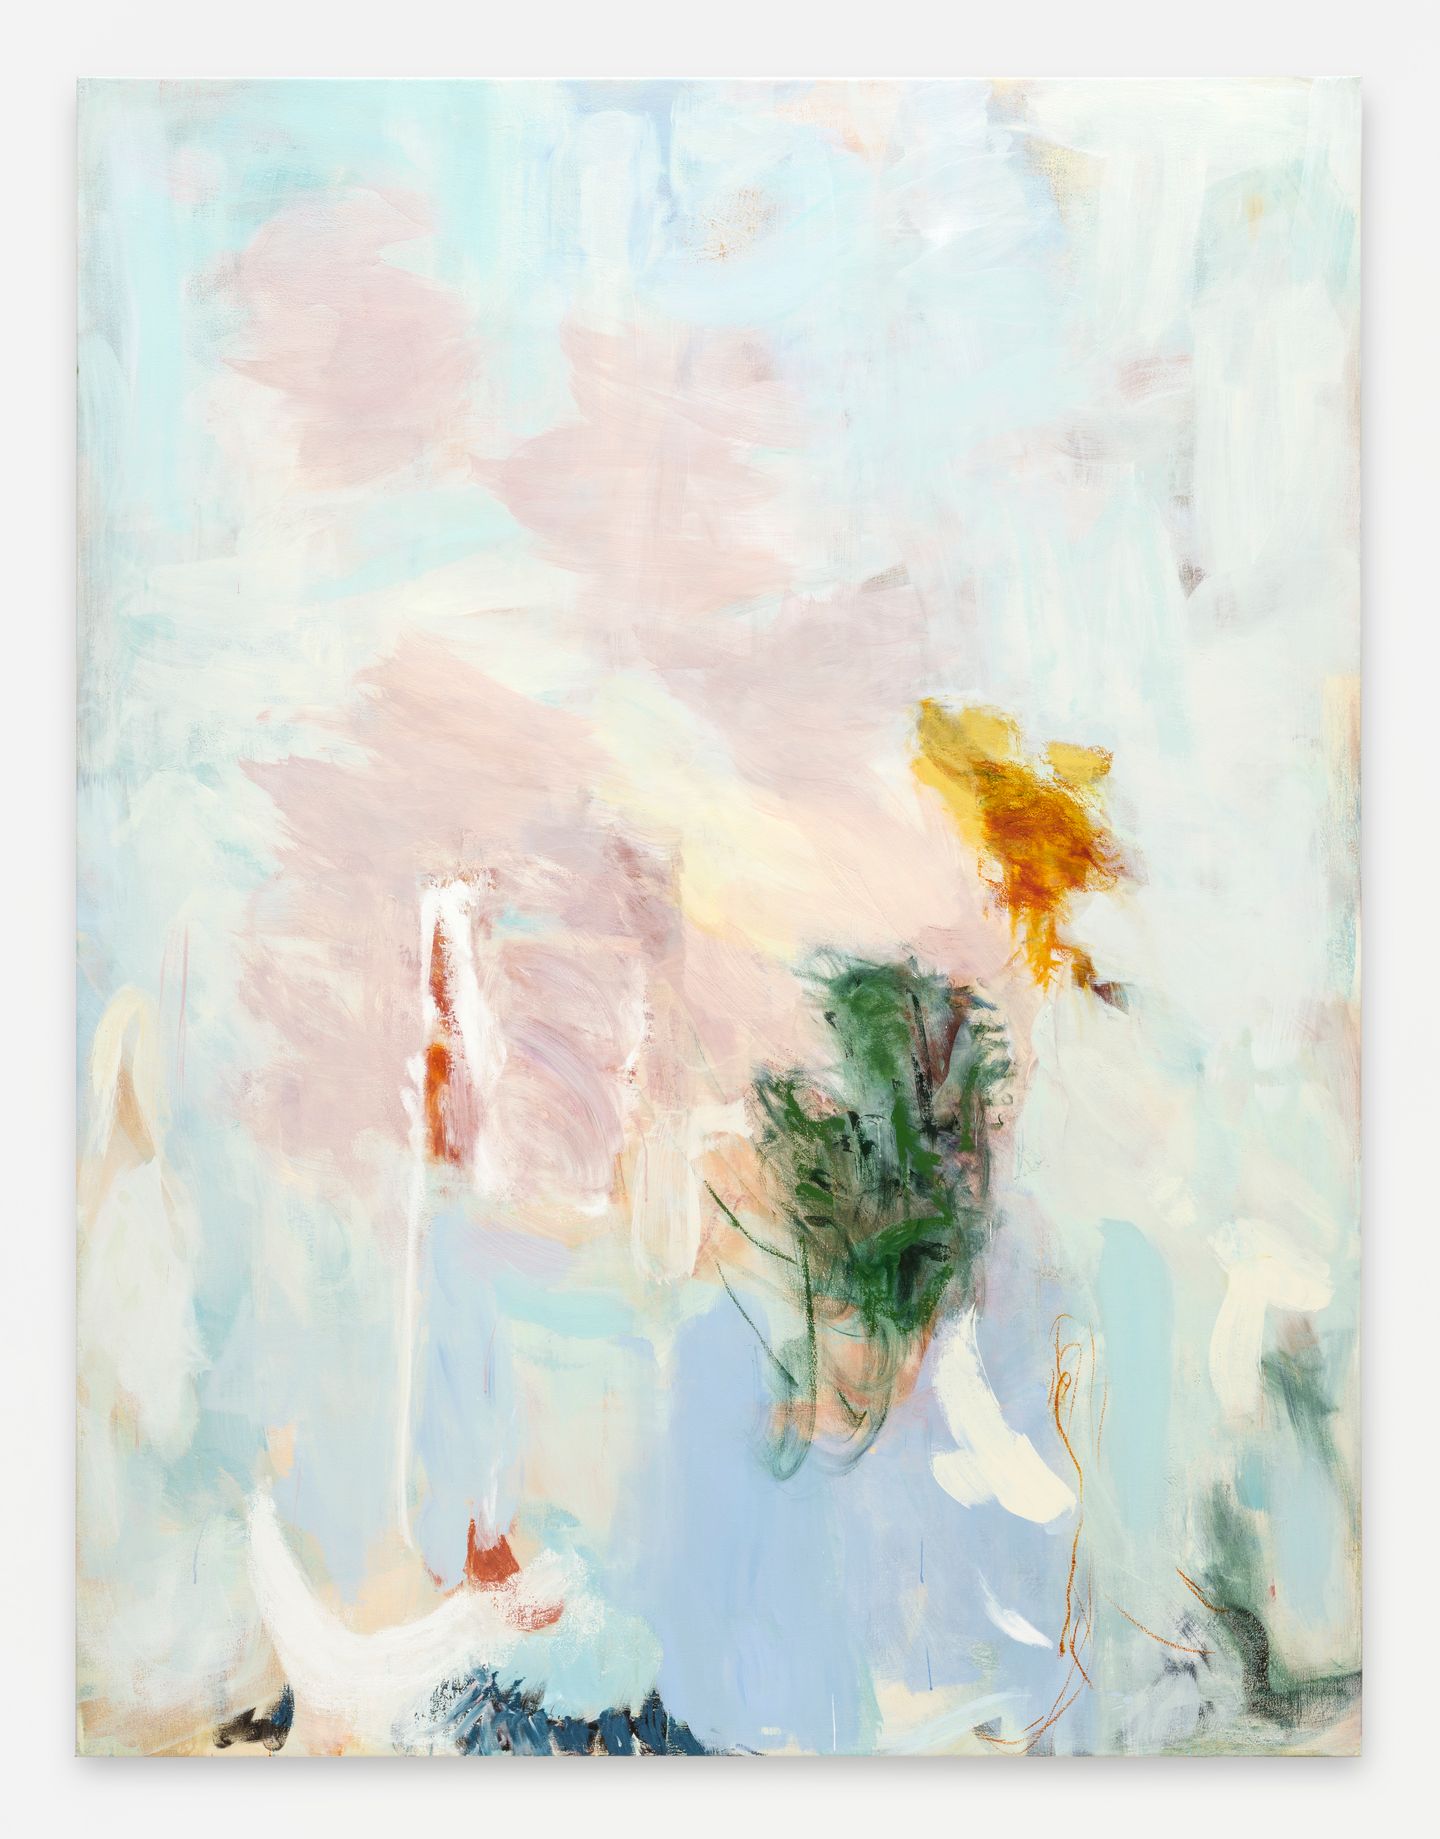 Megan Rooney, Mother's Return (2021). Acrylic and oil stick on canvas. 199.6 x 152.3 x 3.5 cm. Courtesy © Megan Rooney and Thaddaeus Ropac.